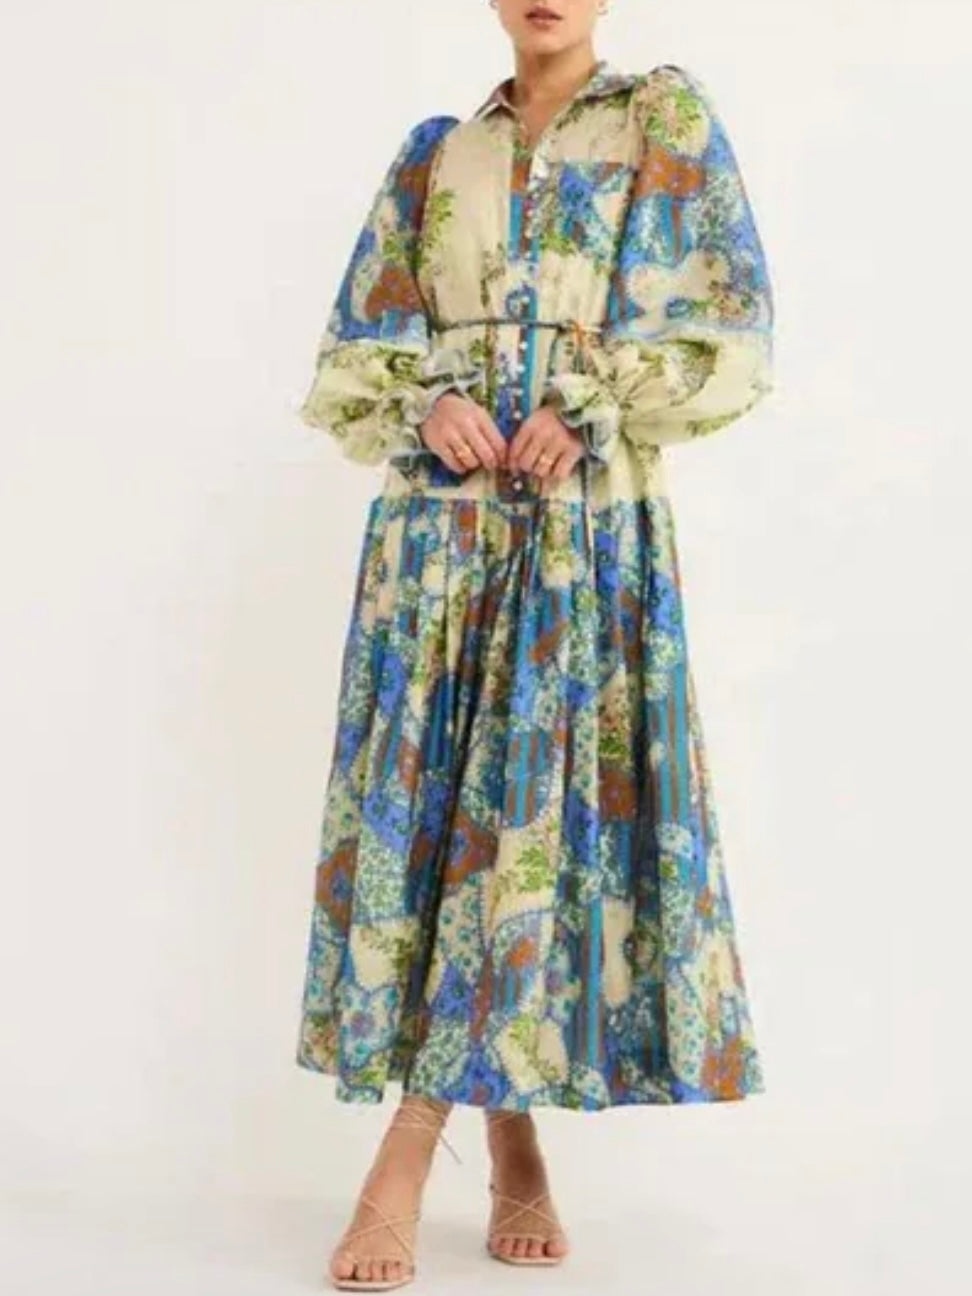 Beige maxi dress green and blue floral pattern